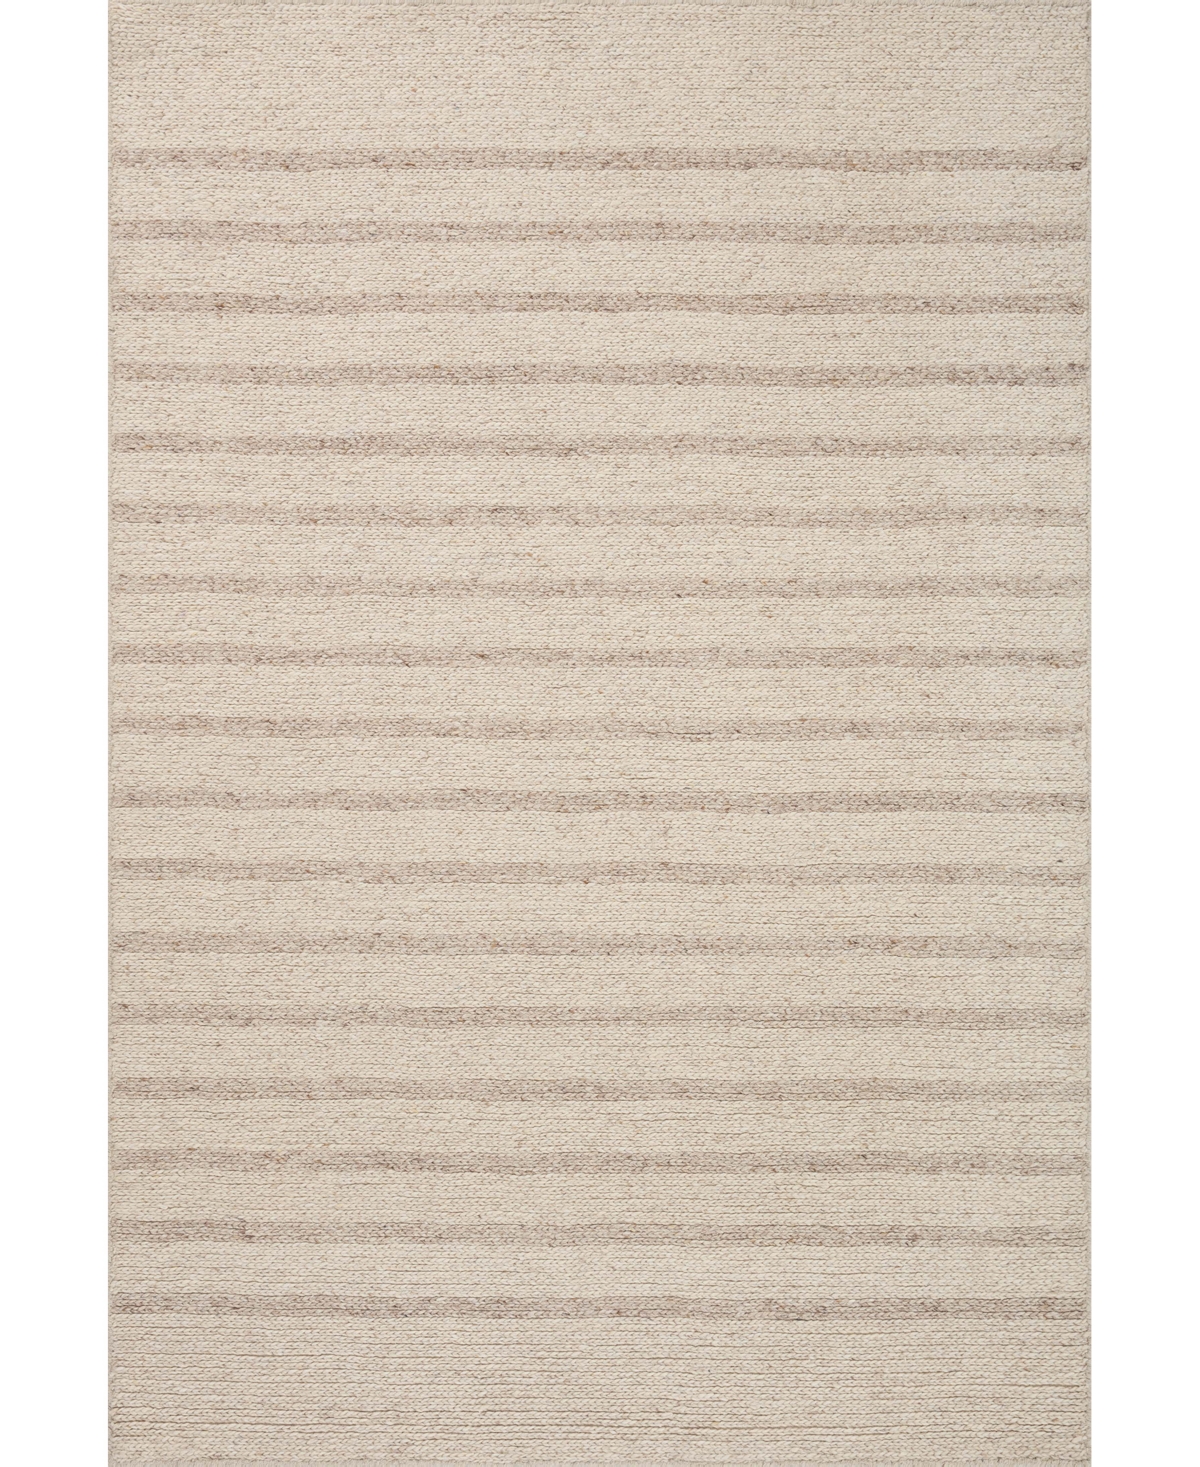 Magnolia Home By Joanna Gaines X Loloi Ashby Ash-01 8'6" X 12' Area Rug In Oatmeal